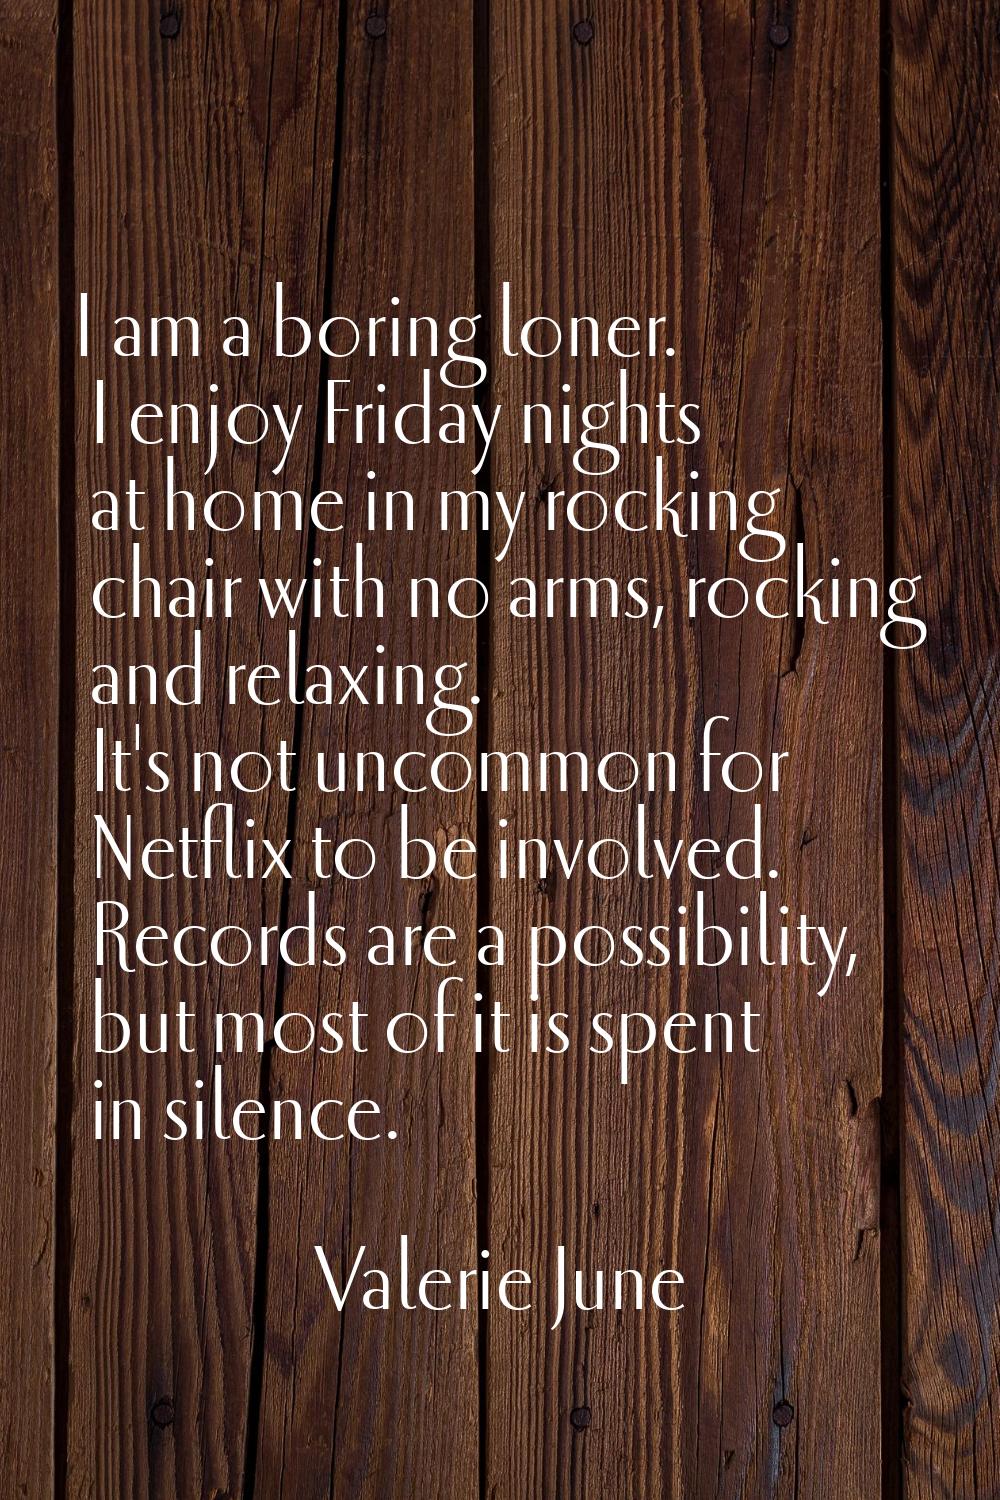 I am a boring loner. I enjoy Friday nights at home in my rocking chair with no arms, rocking and re